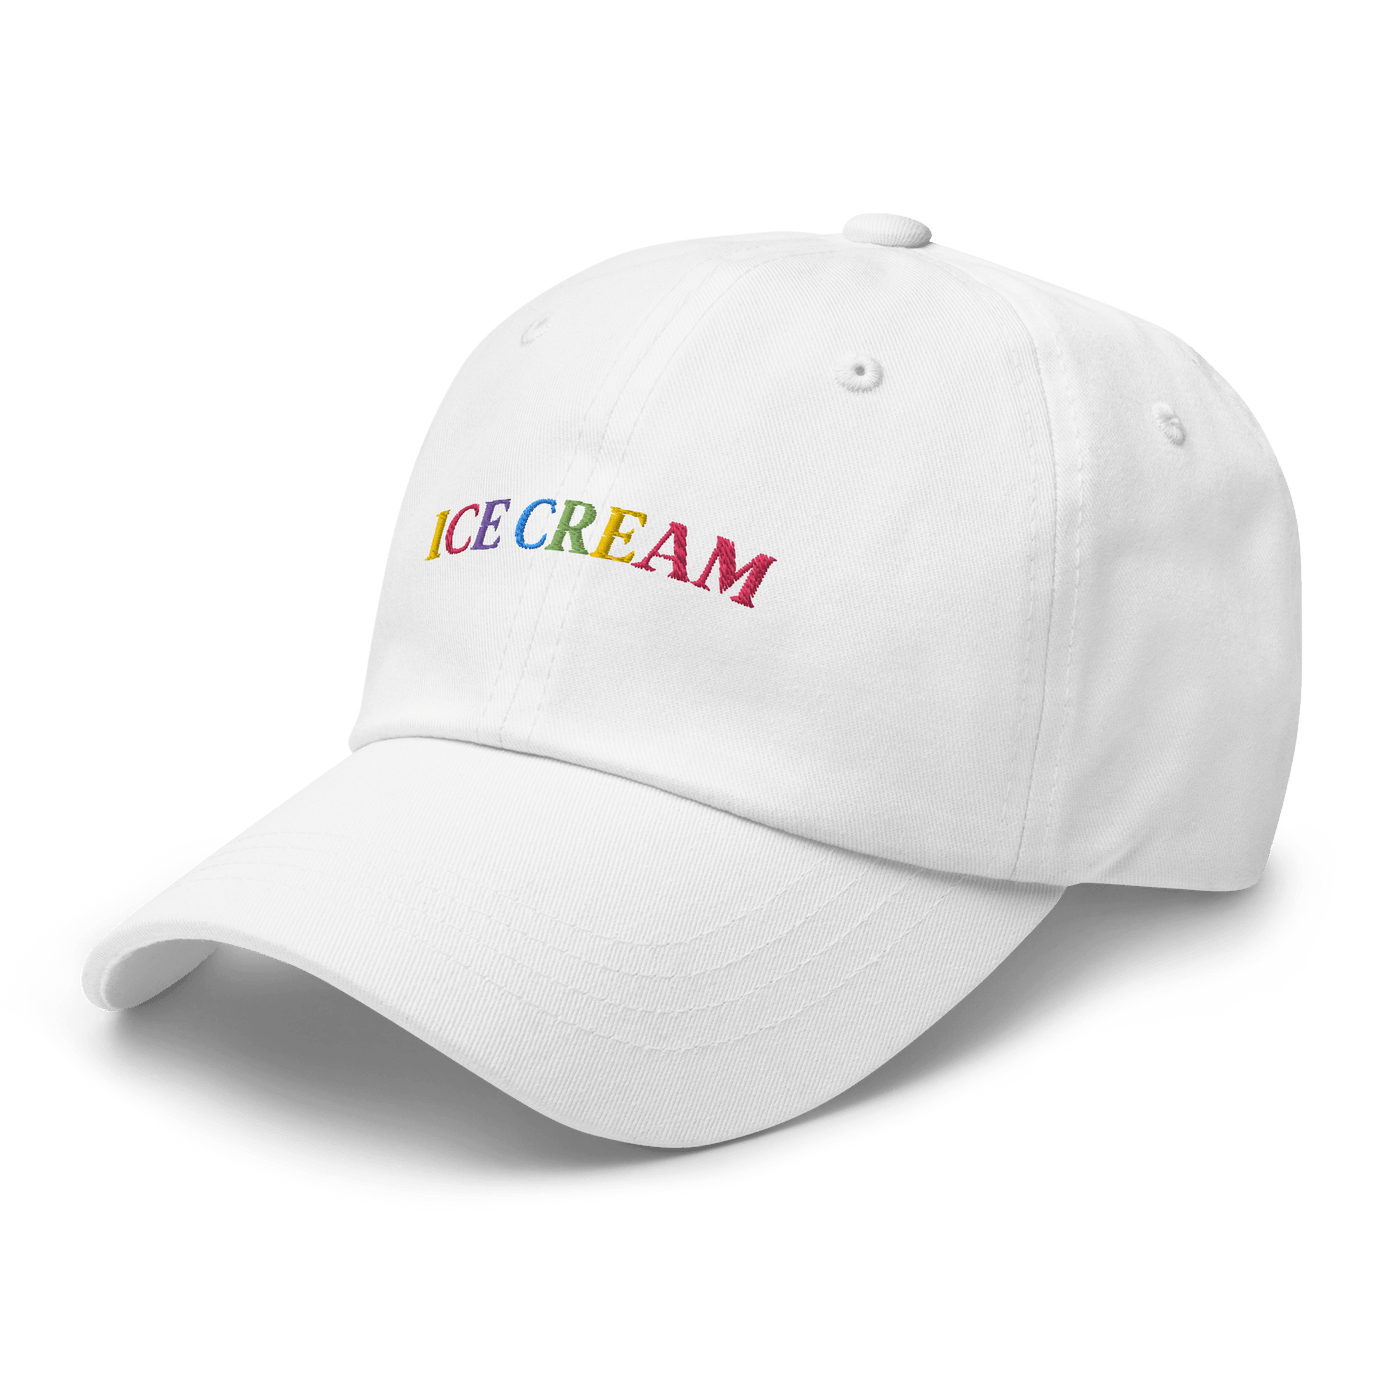 Ice Cream Text Dad hat - Light Blue - - Just Another Cap Store